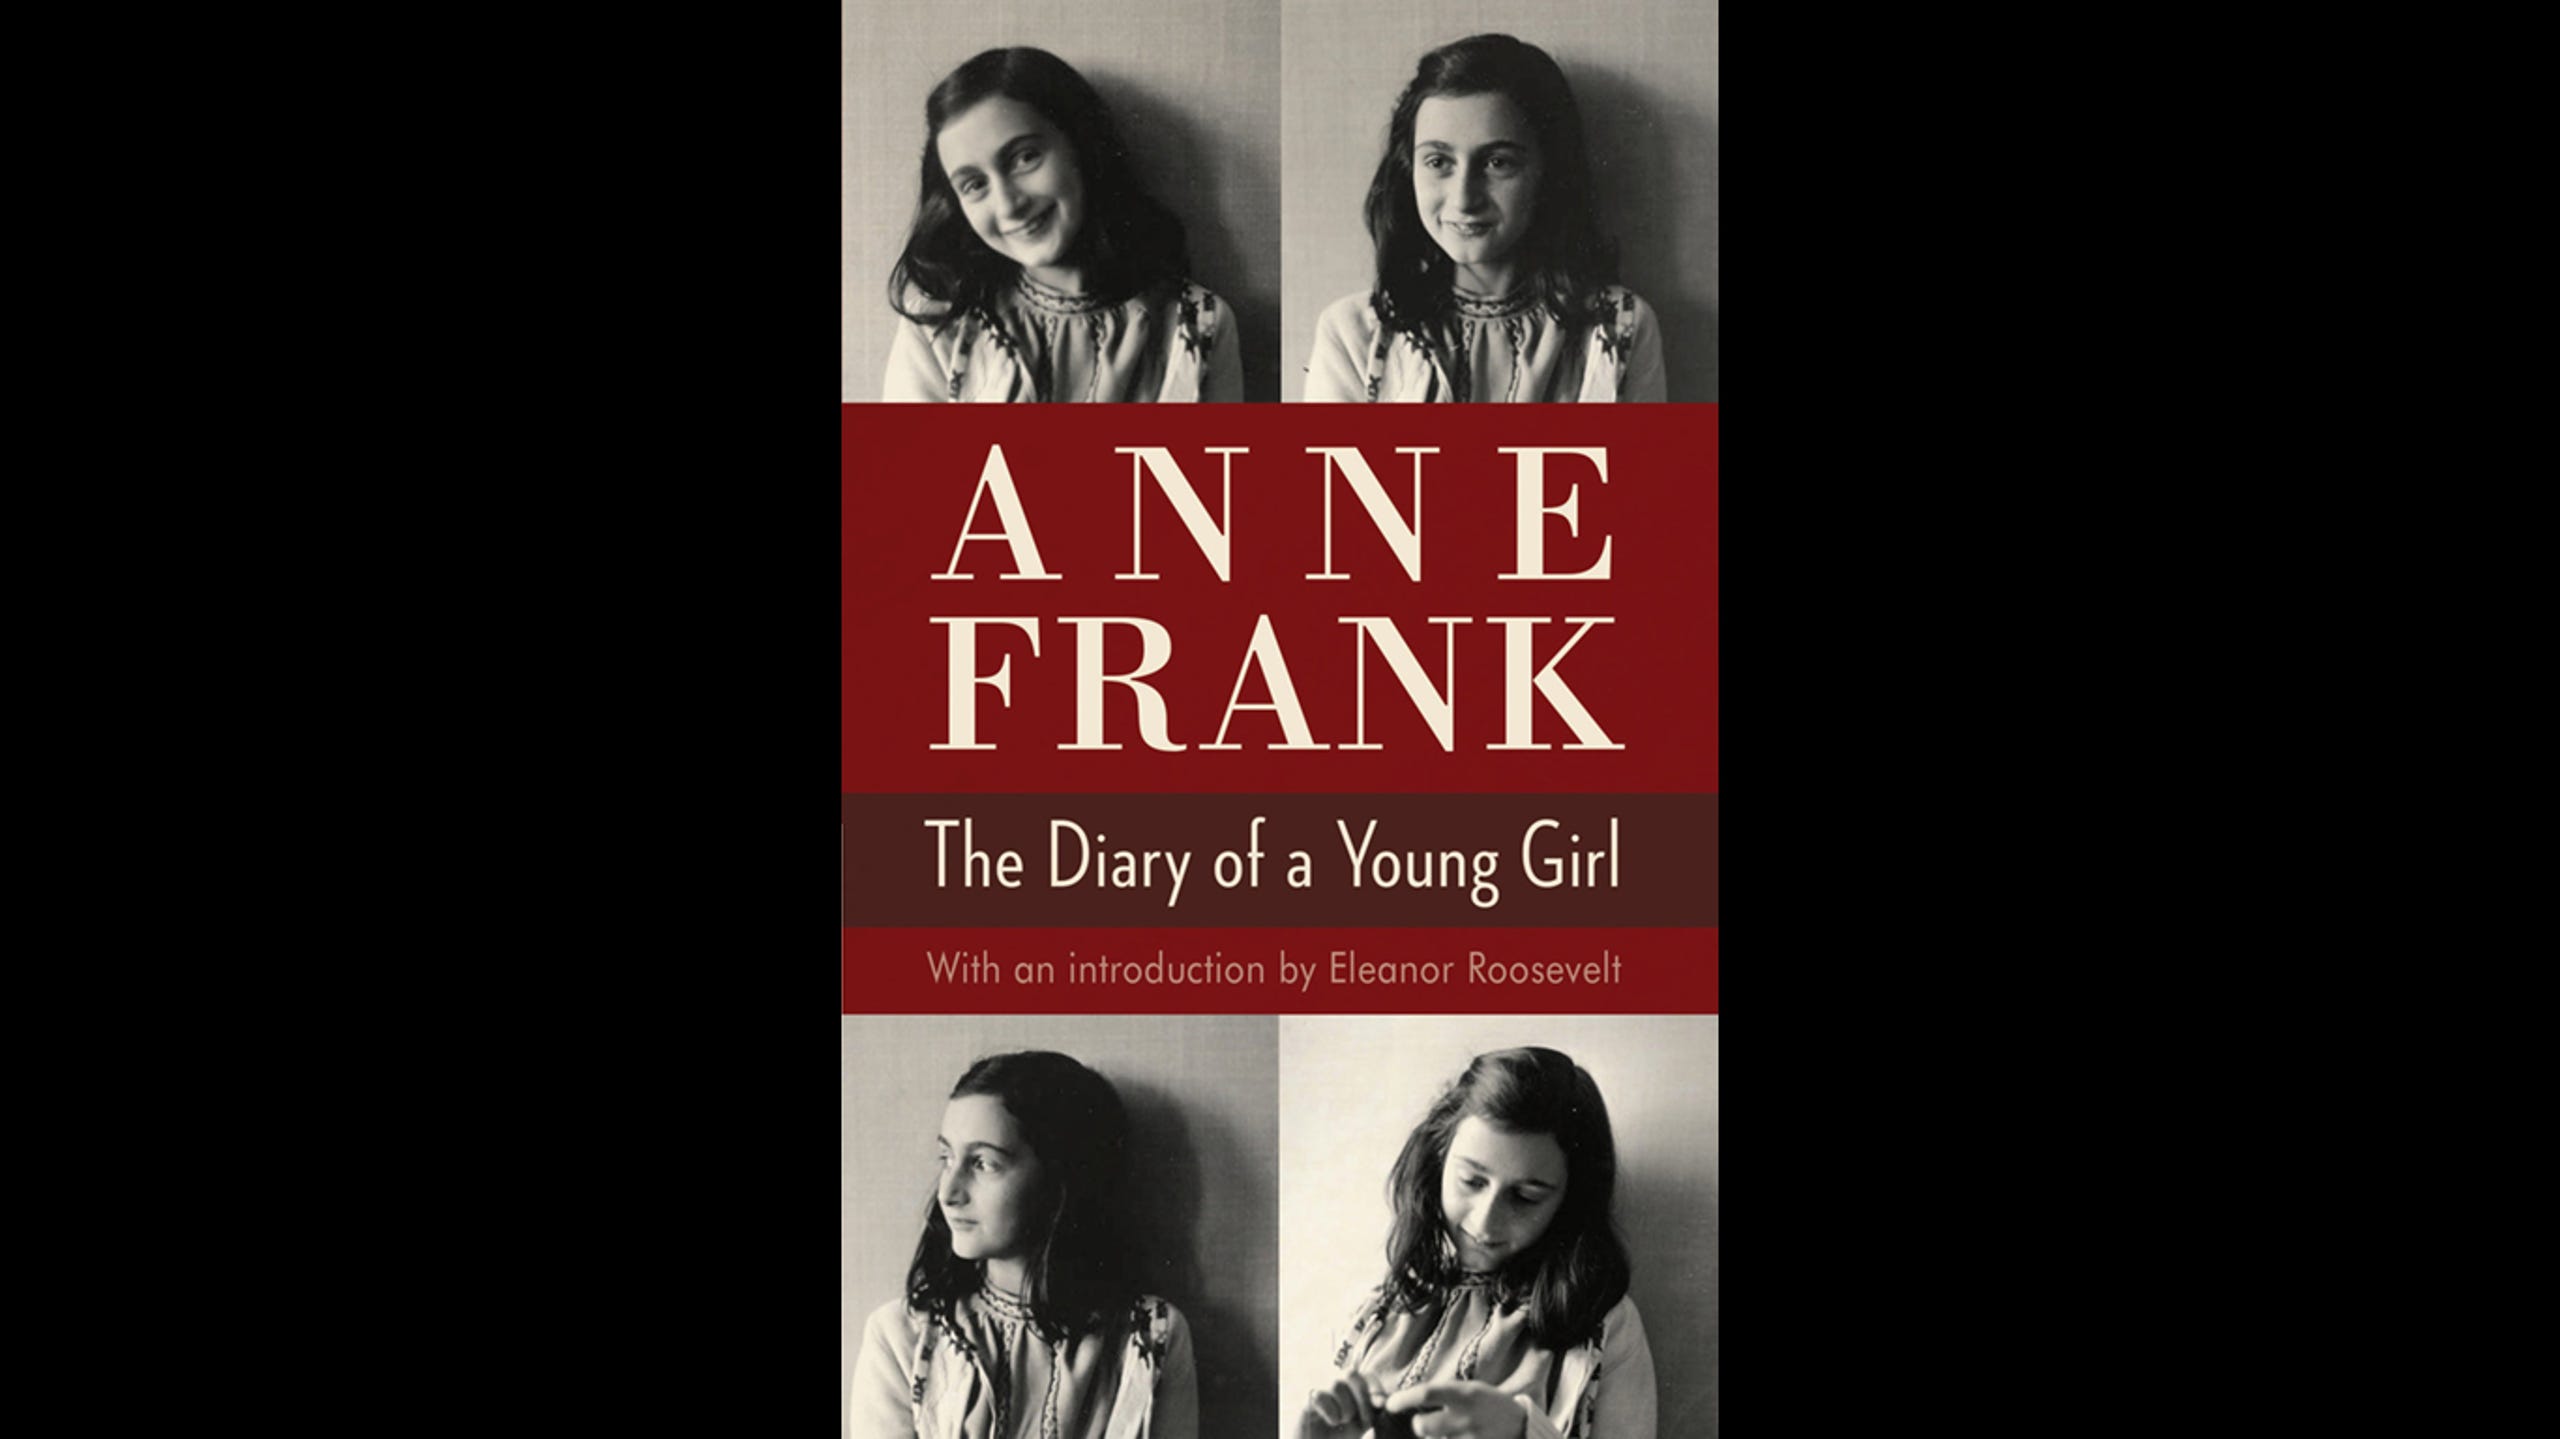 <strong>9. The Diary Of A Young Girl </strong><strong>• Author:</strong> Anne Frank <strong>• Originally published in:</strong> 1947 <strong>• </strong>The book, or rather a journal, is also known as "The Diary of Anne Frank." In the diary, Anne, a Dutch Jewish teenager, describes her family's life in hiding from the Nazis during the Holocaust, between 1942 and 1944. Frank and her family were discovered and sent to a concentration camp, where she died in 1945. "A tragic brilliant evocation of one girl's life cut short by intolerance and ignorance and her ability to maintain hope despite everything she faces," Uruburu said. "It is especially relevant in an age where [there] are those who deny the Holocaust ever happened."